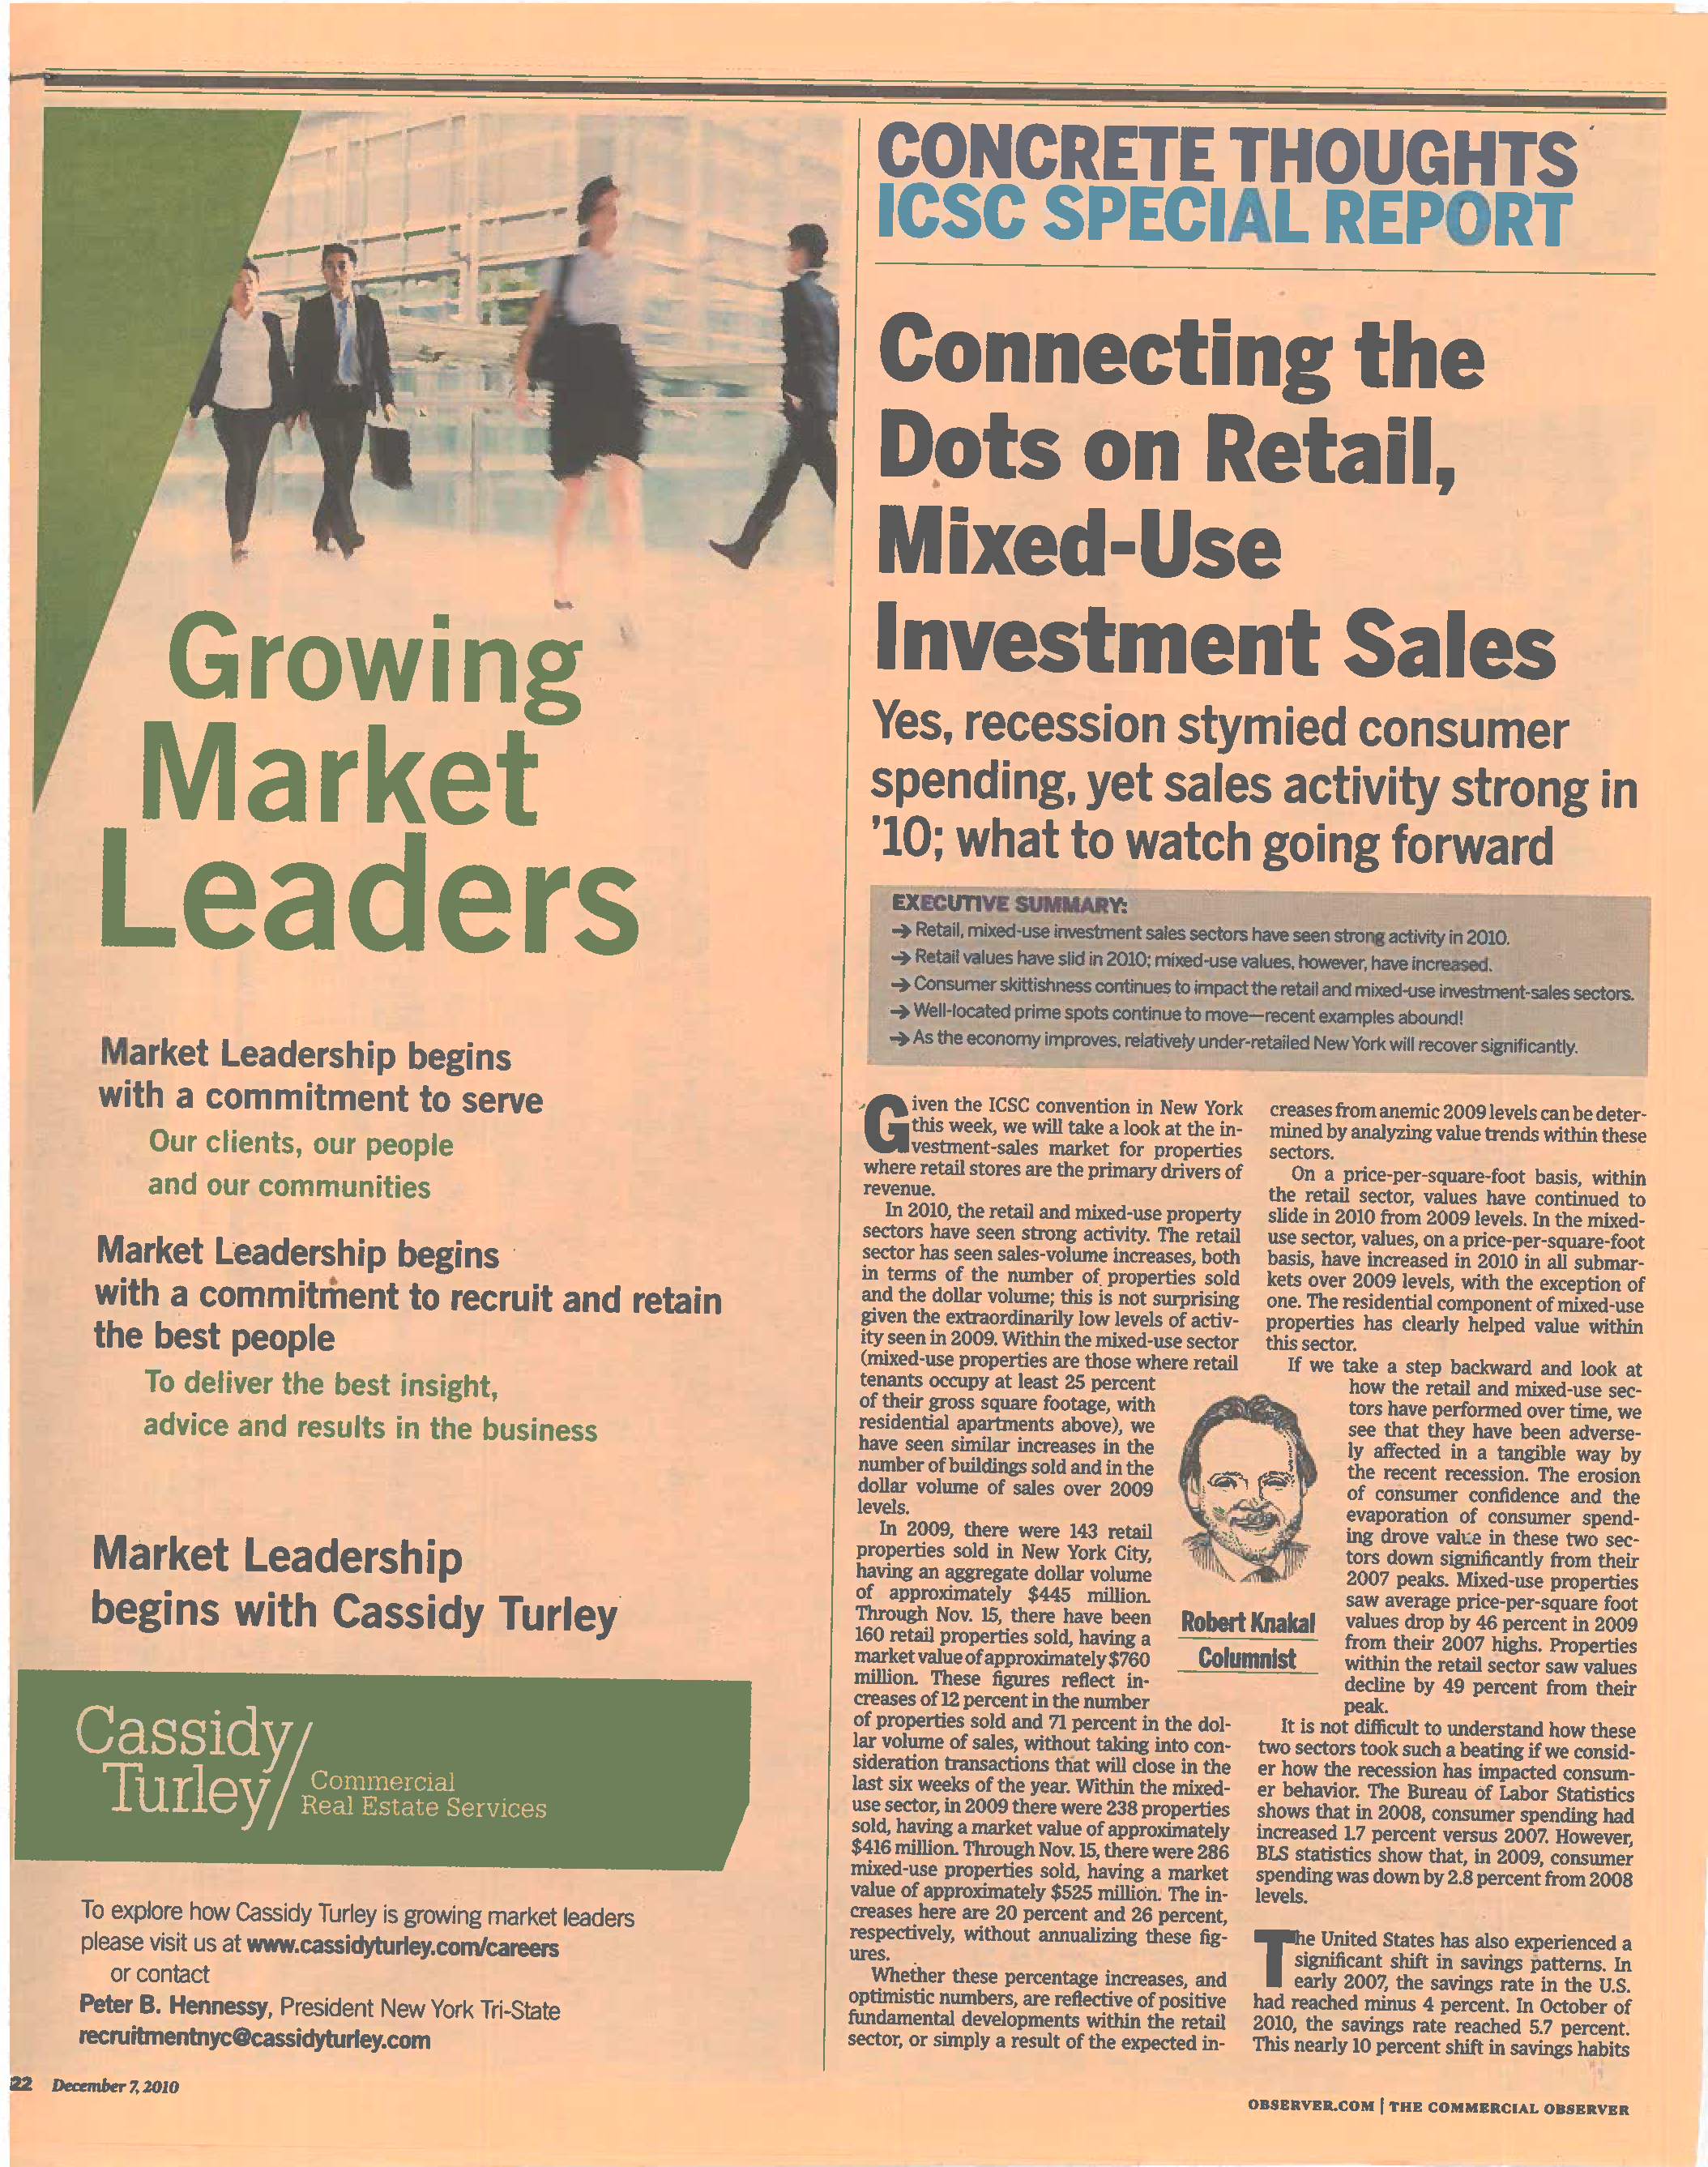 Concrete Thoughts - Connecting the Dots on Retail, Mixed-Use Investment Sales - Dec 7 2010_Page_1